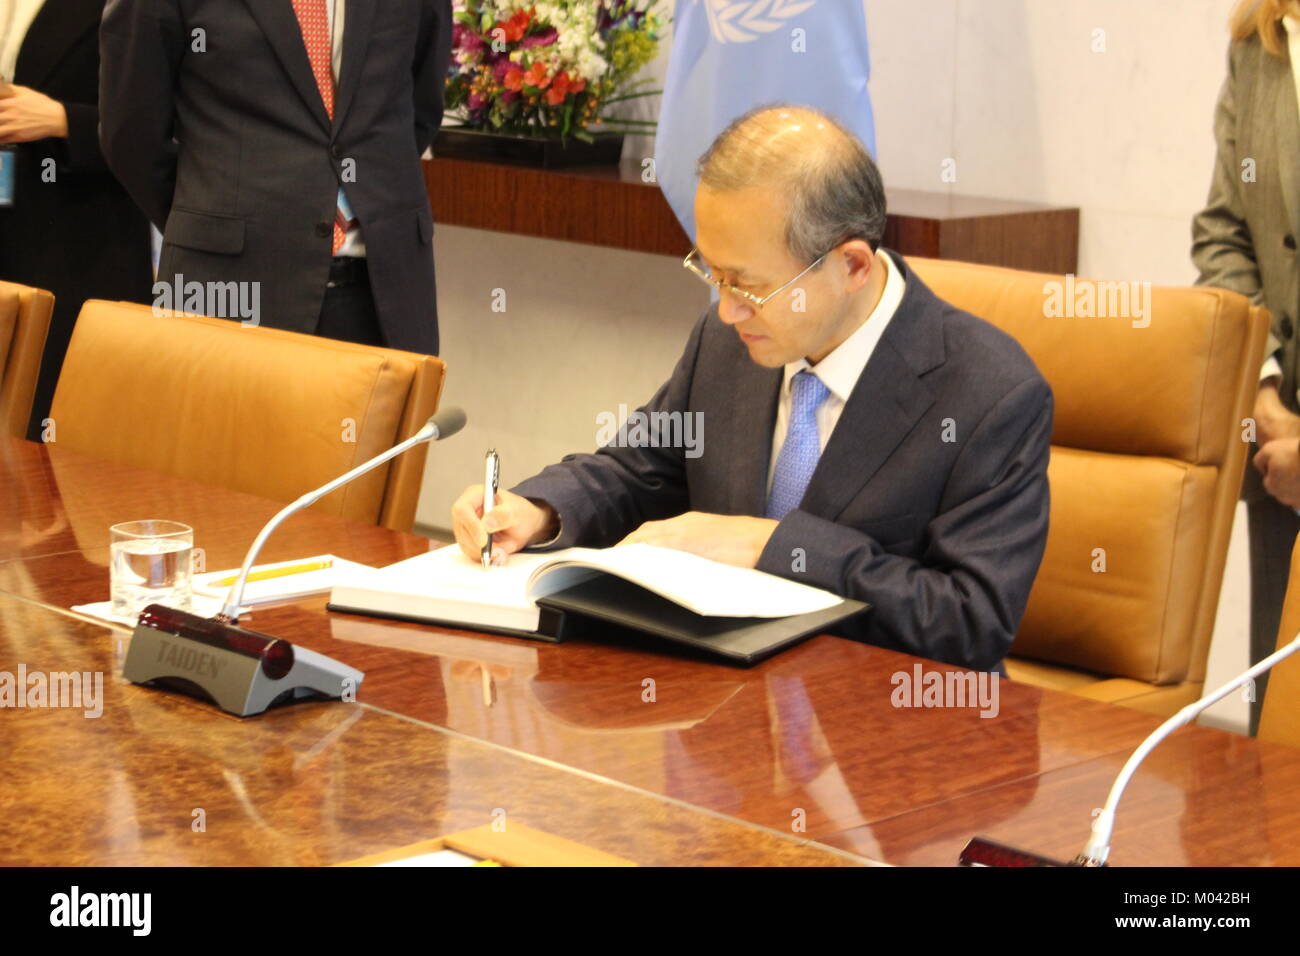 UN, New York, USA. 18th Jan, 2018. UN Sec-Gen Antonio Guterres met Lim Sung-nam, First Vice Foreign Minister, Republic of Korea, who signed UN visitors book. Photo: Matthew Russell Lee / Inner City Press Credit: Matthew Russell Lee/Alamy Live News Stock Photo